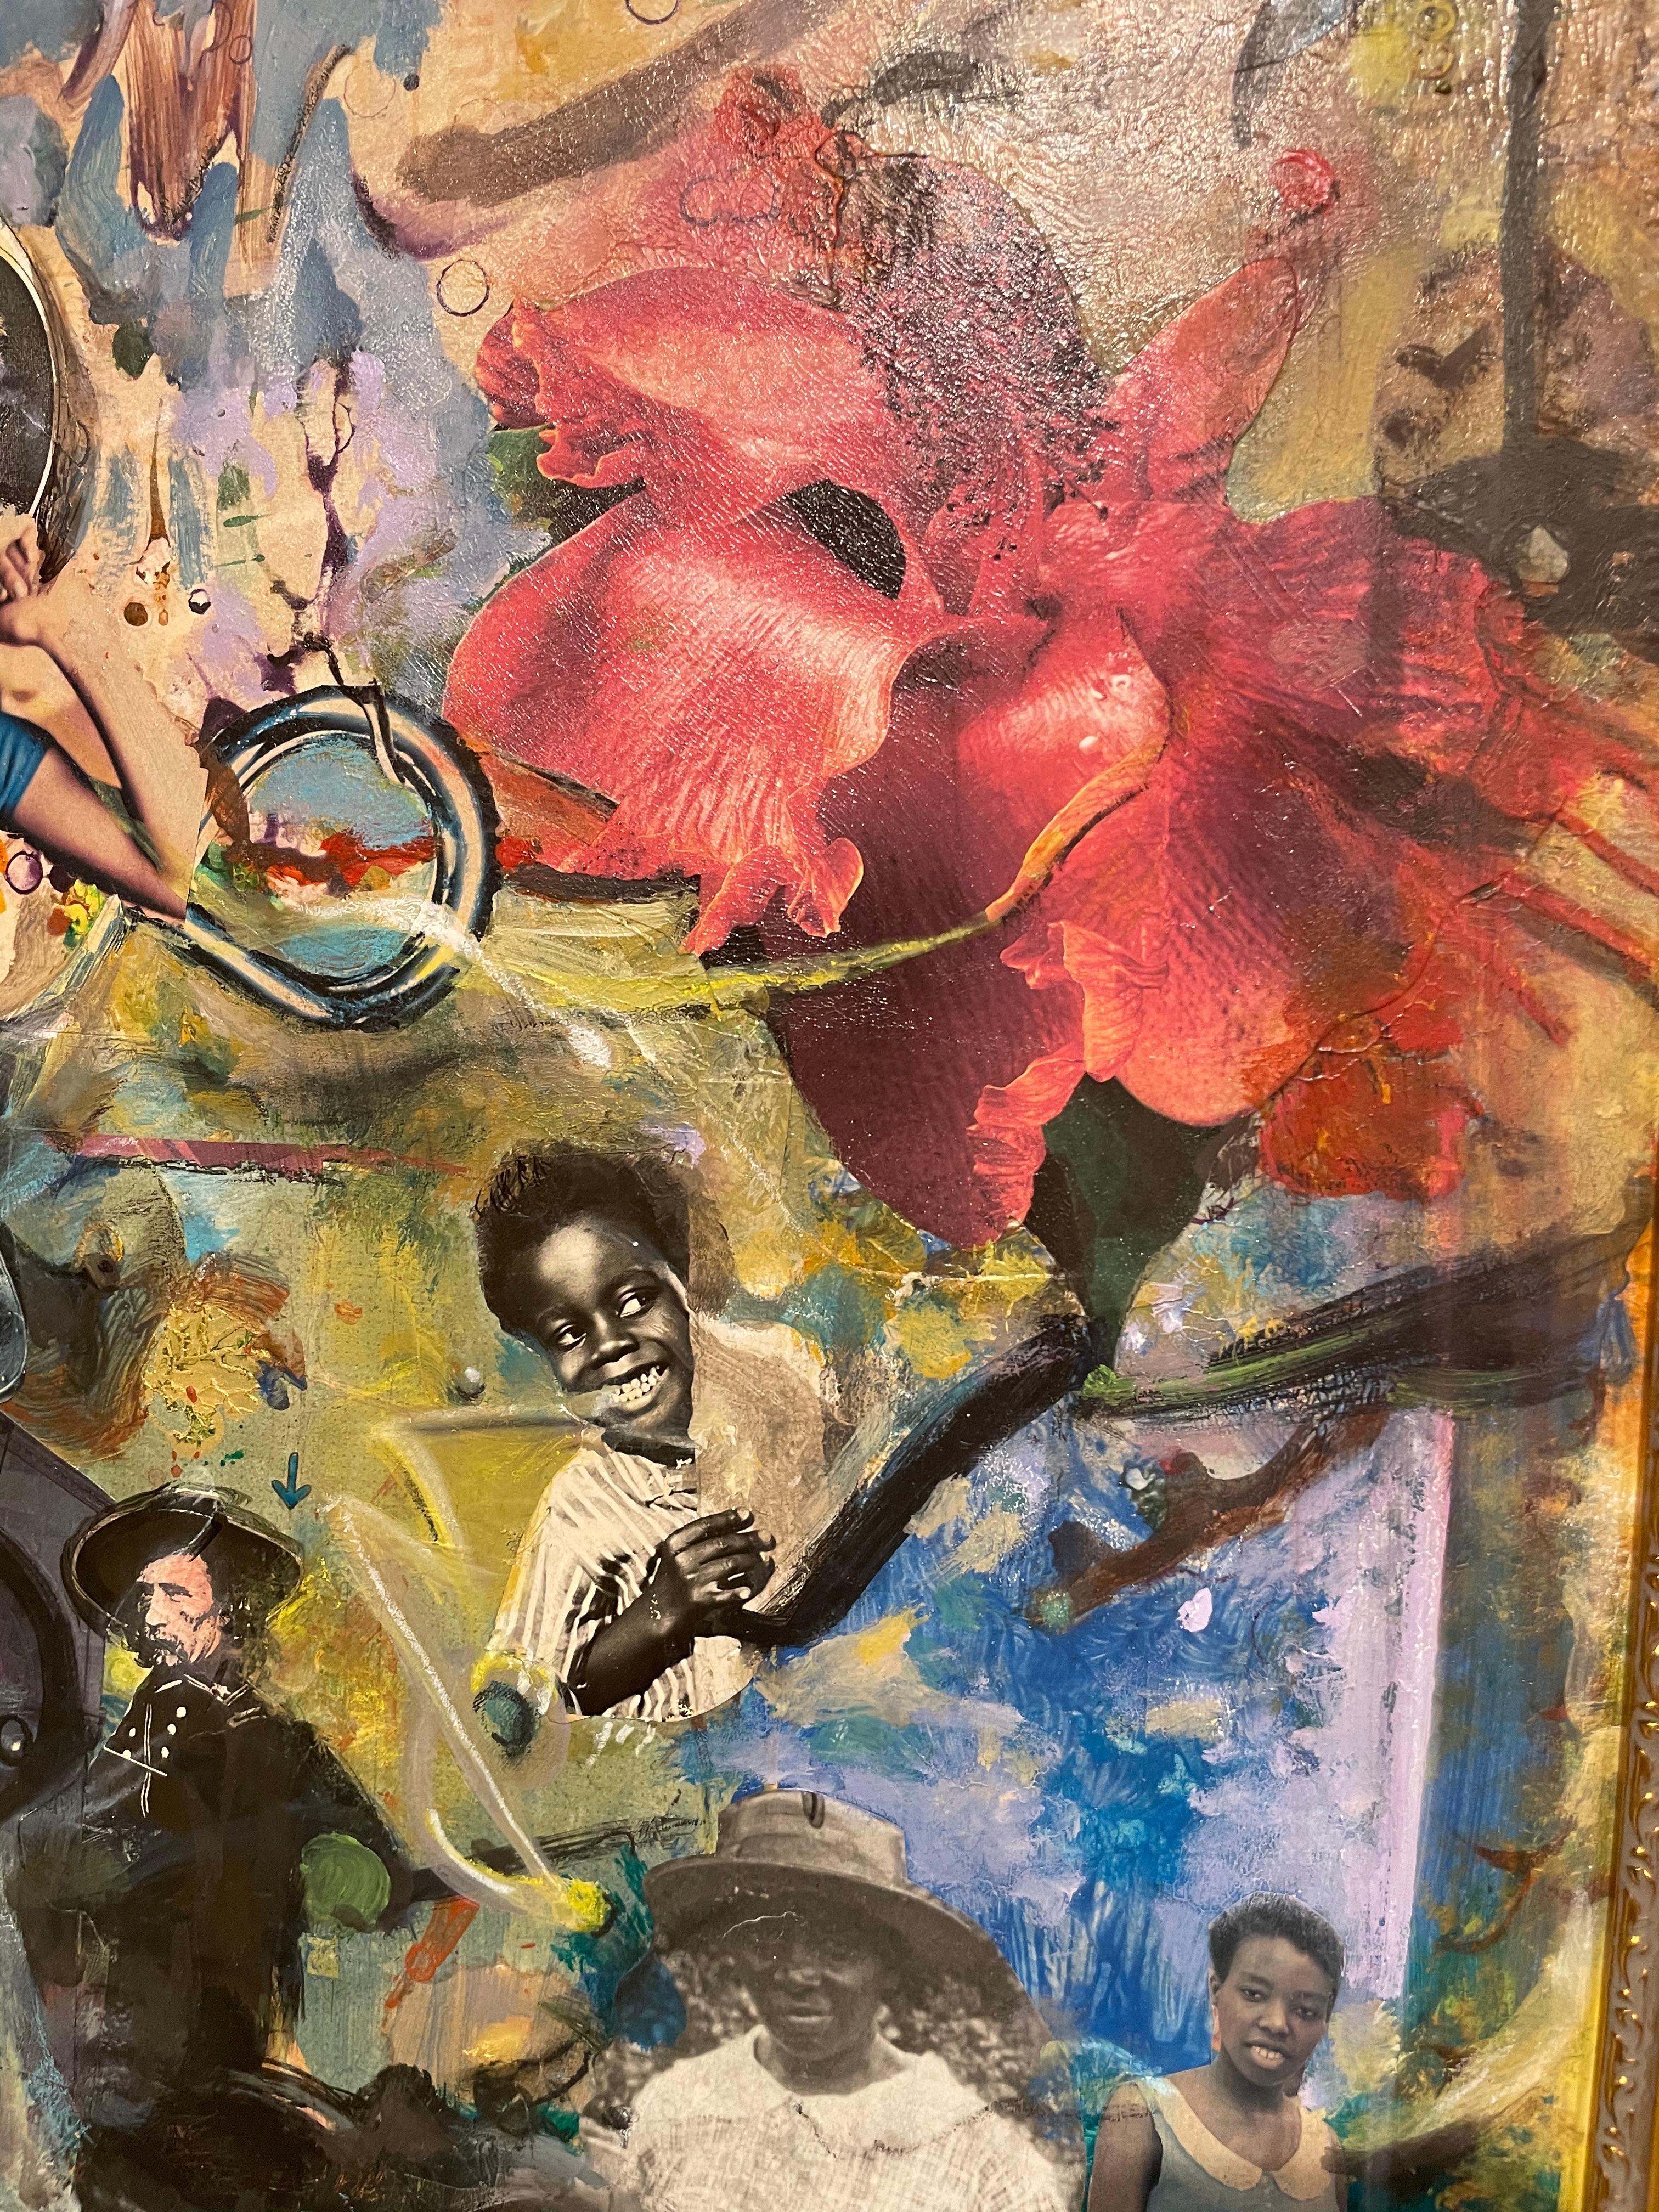 Beyond the Blues: African American abstract collage painting w/ figures, flowers - Abstract Painting by Richard J. Watson